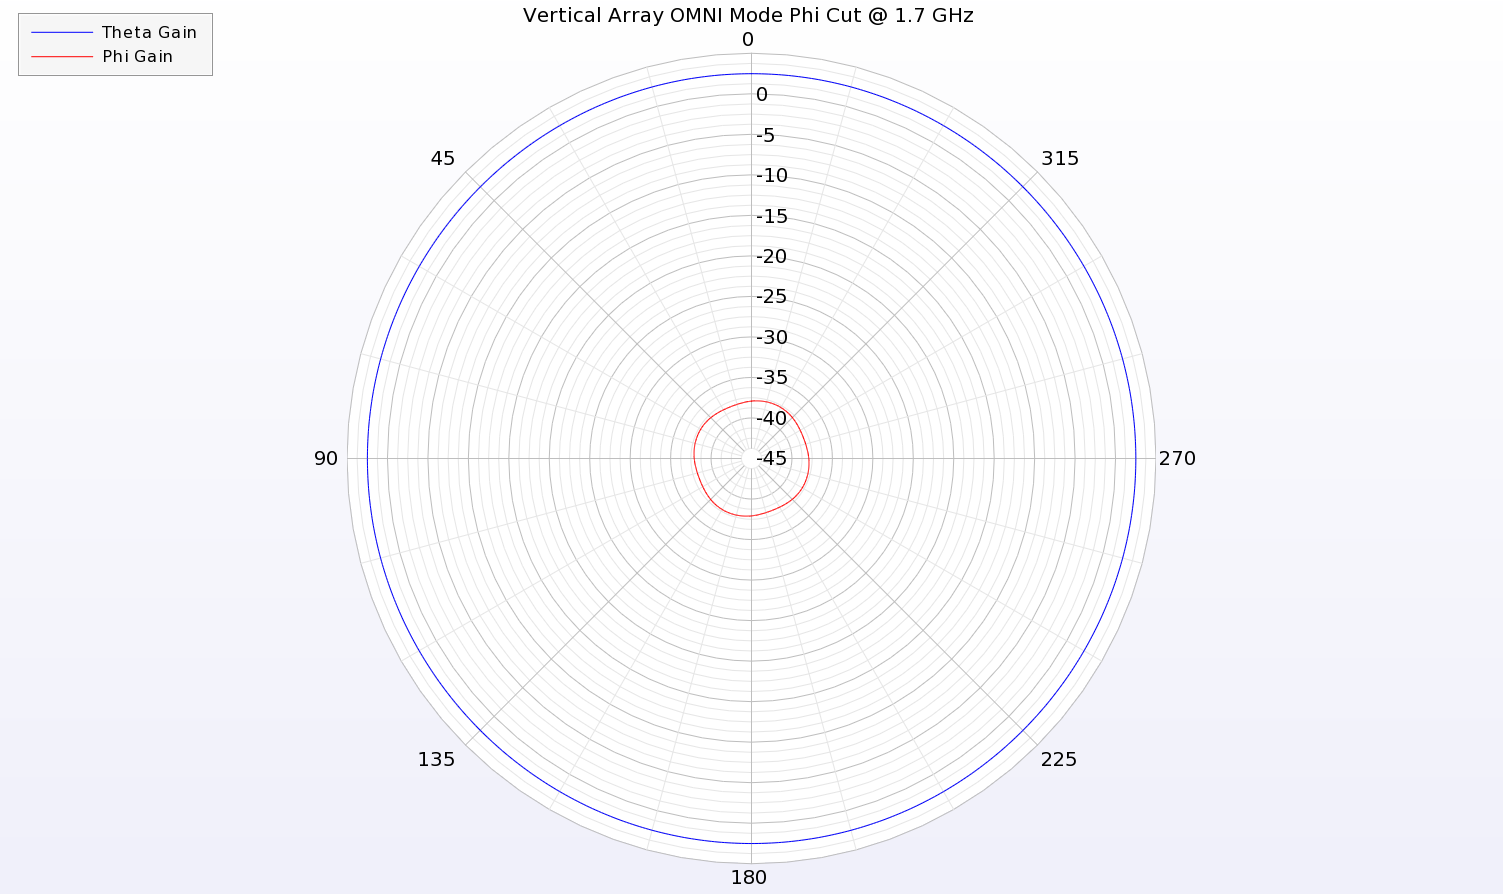 Figure 11: An azimuthal cut of the pattern at 1.7 GHz shows uniform gain of the vertical polarization (Theta) for the electric monopole array in OMNI mode.